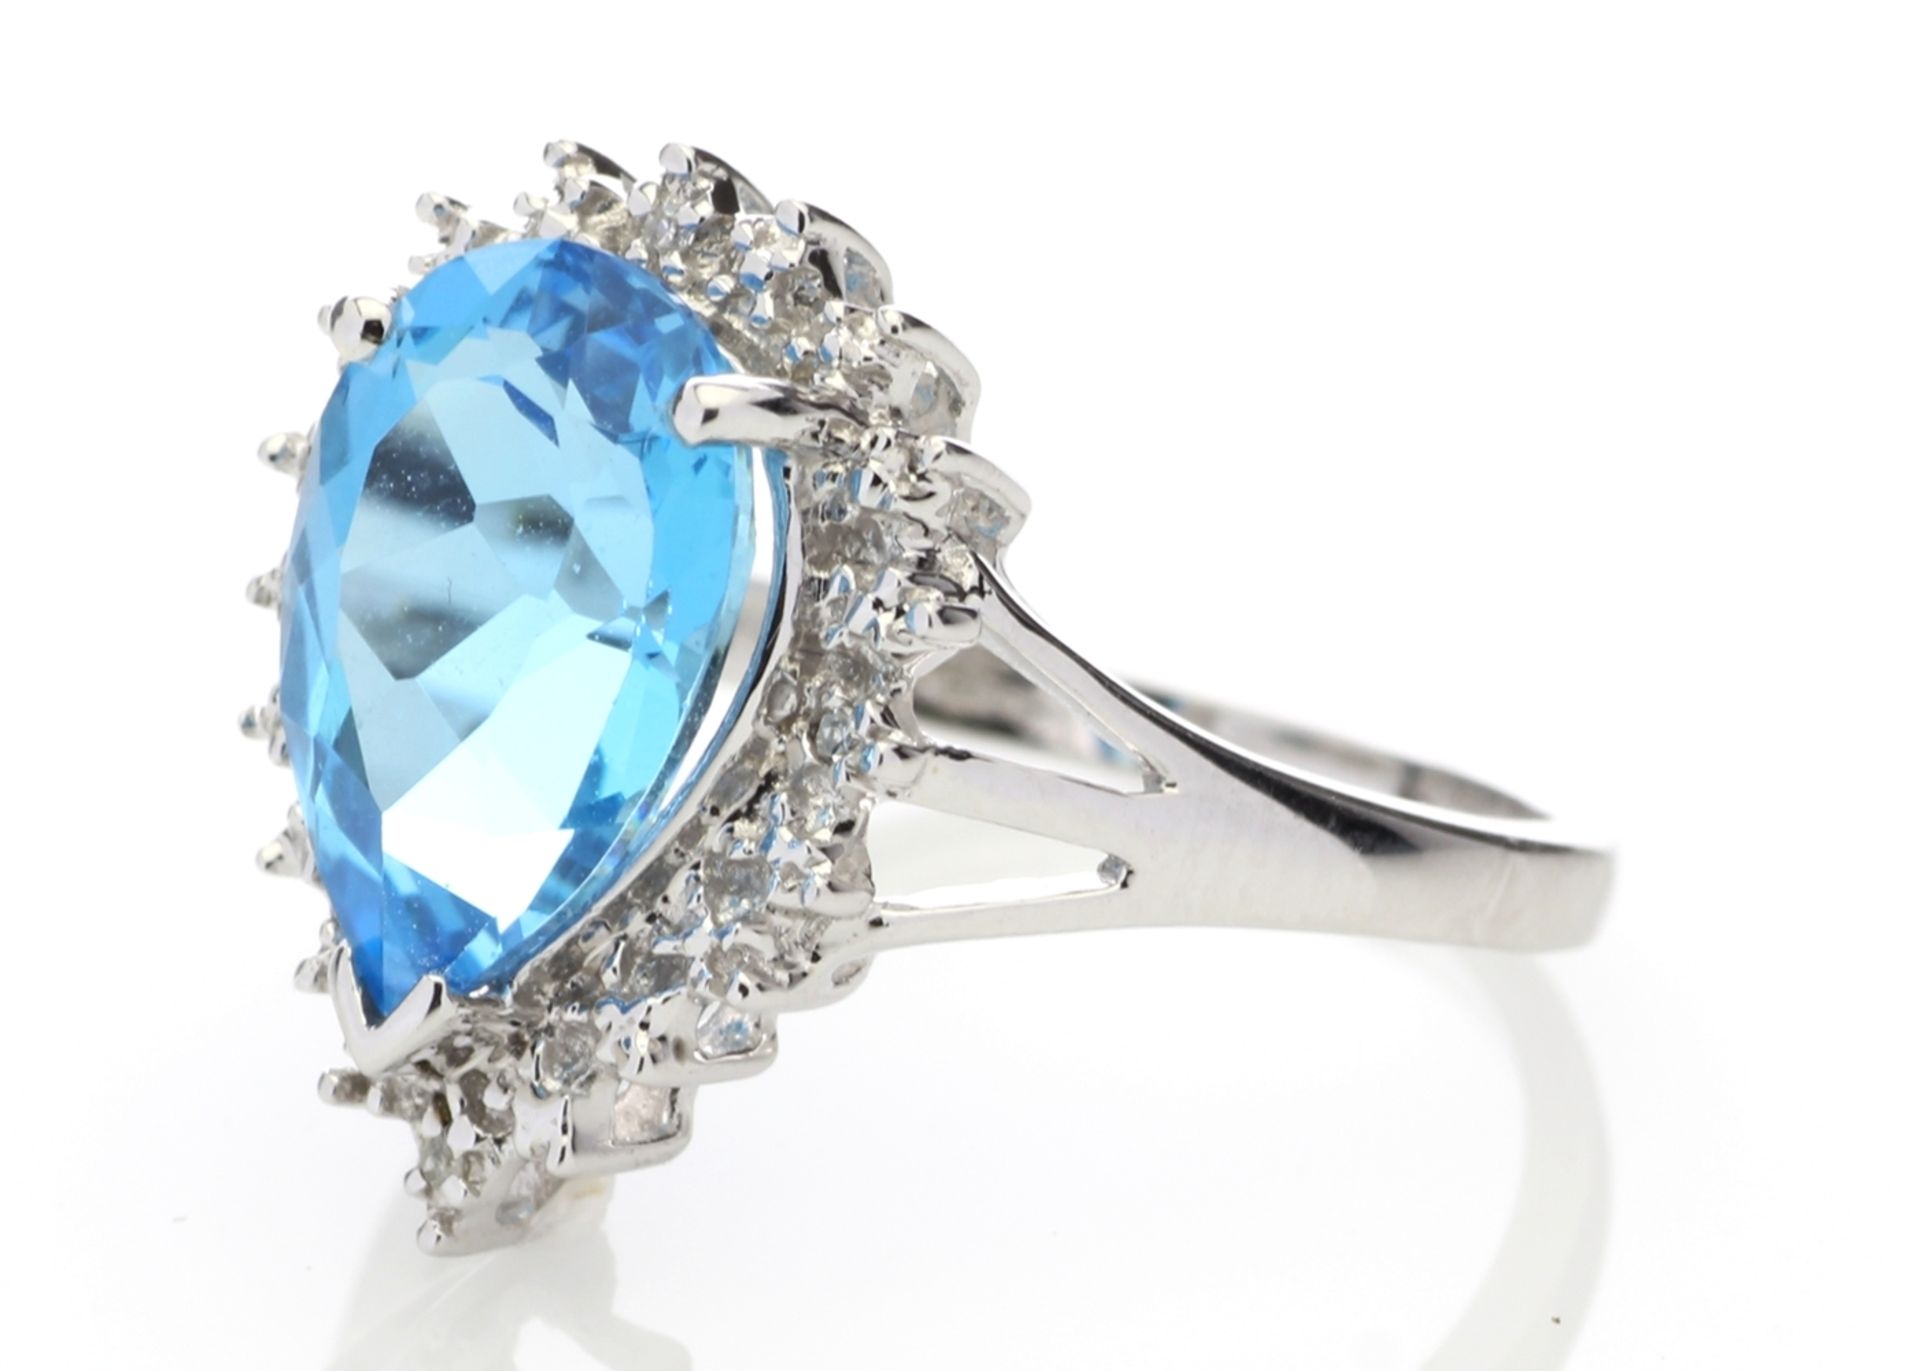 9ct White Gold Diamond And Blue Topaz Ring 0.01 Carats - Image 2 of 6